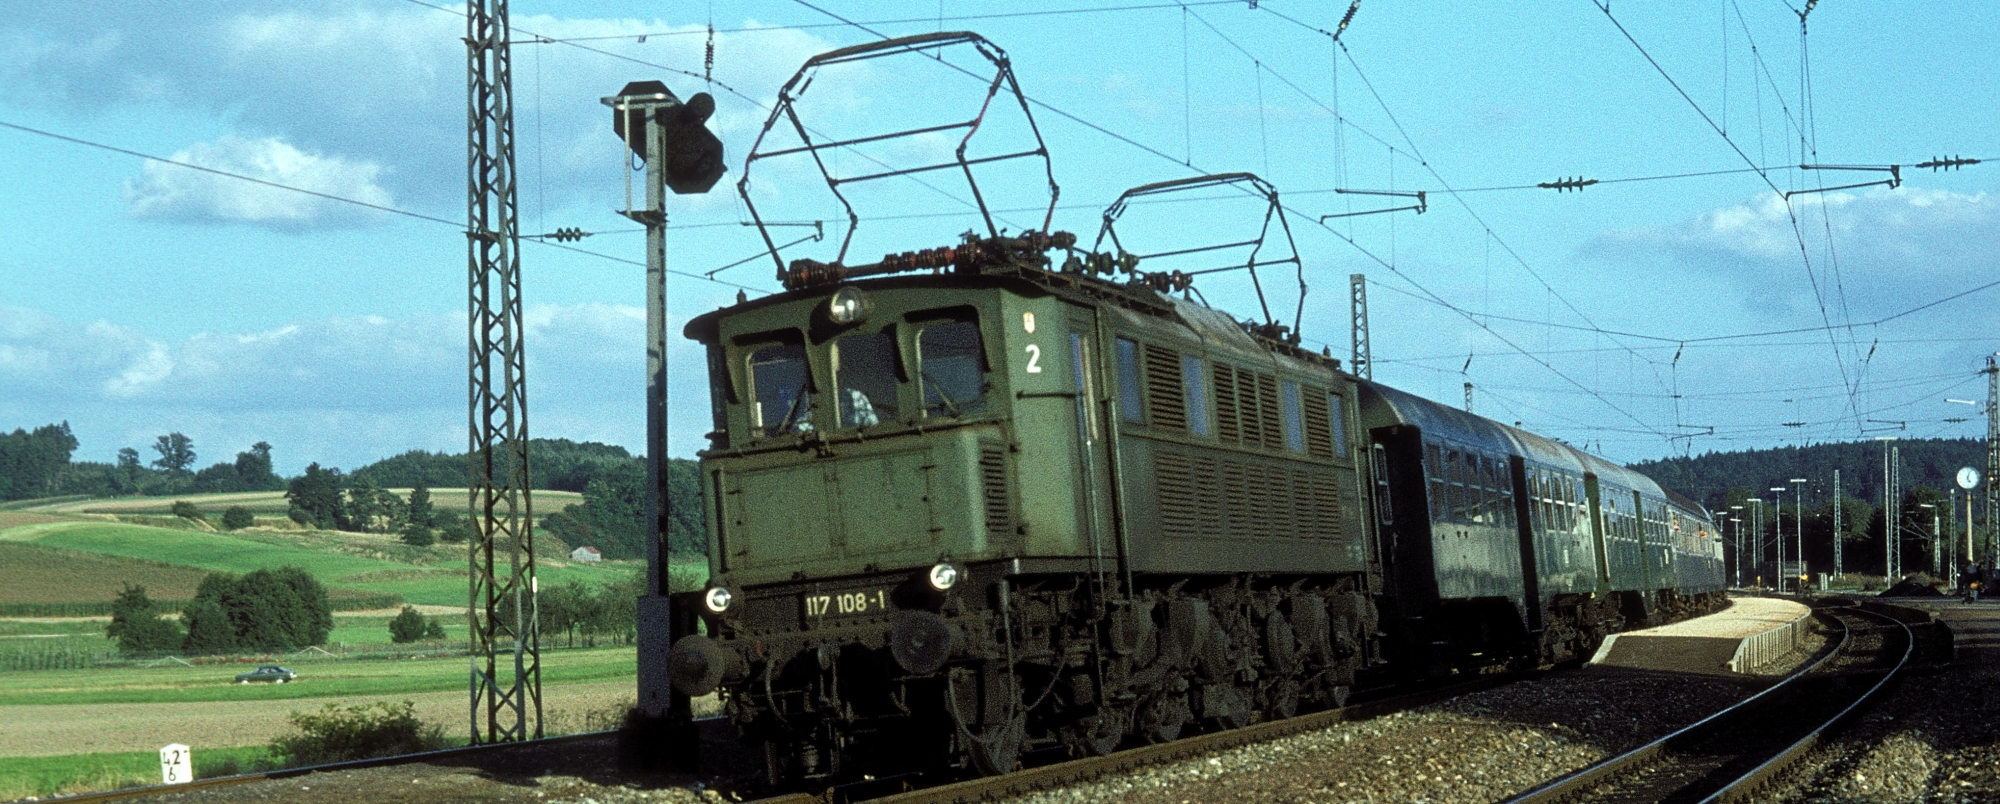 117 108 in September 1977 in front of a local train near Jettingen